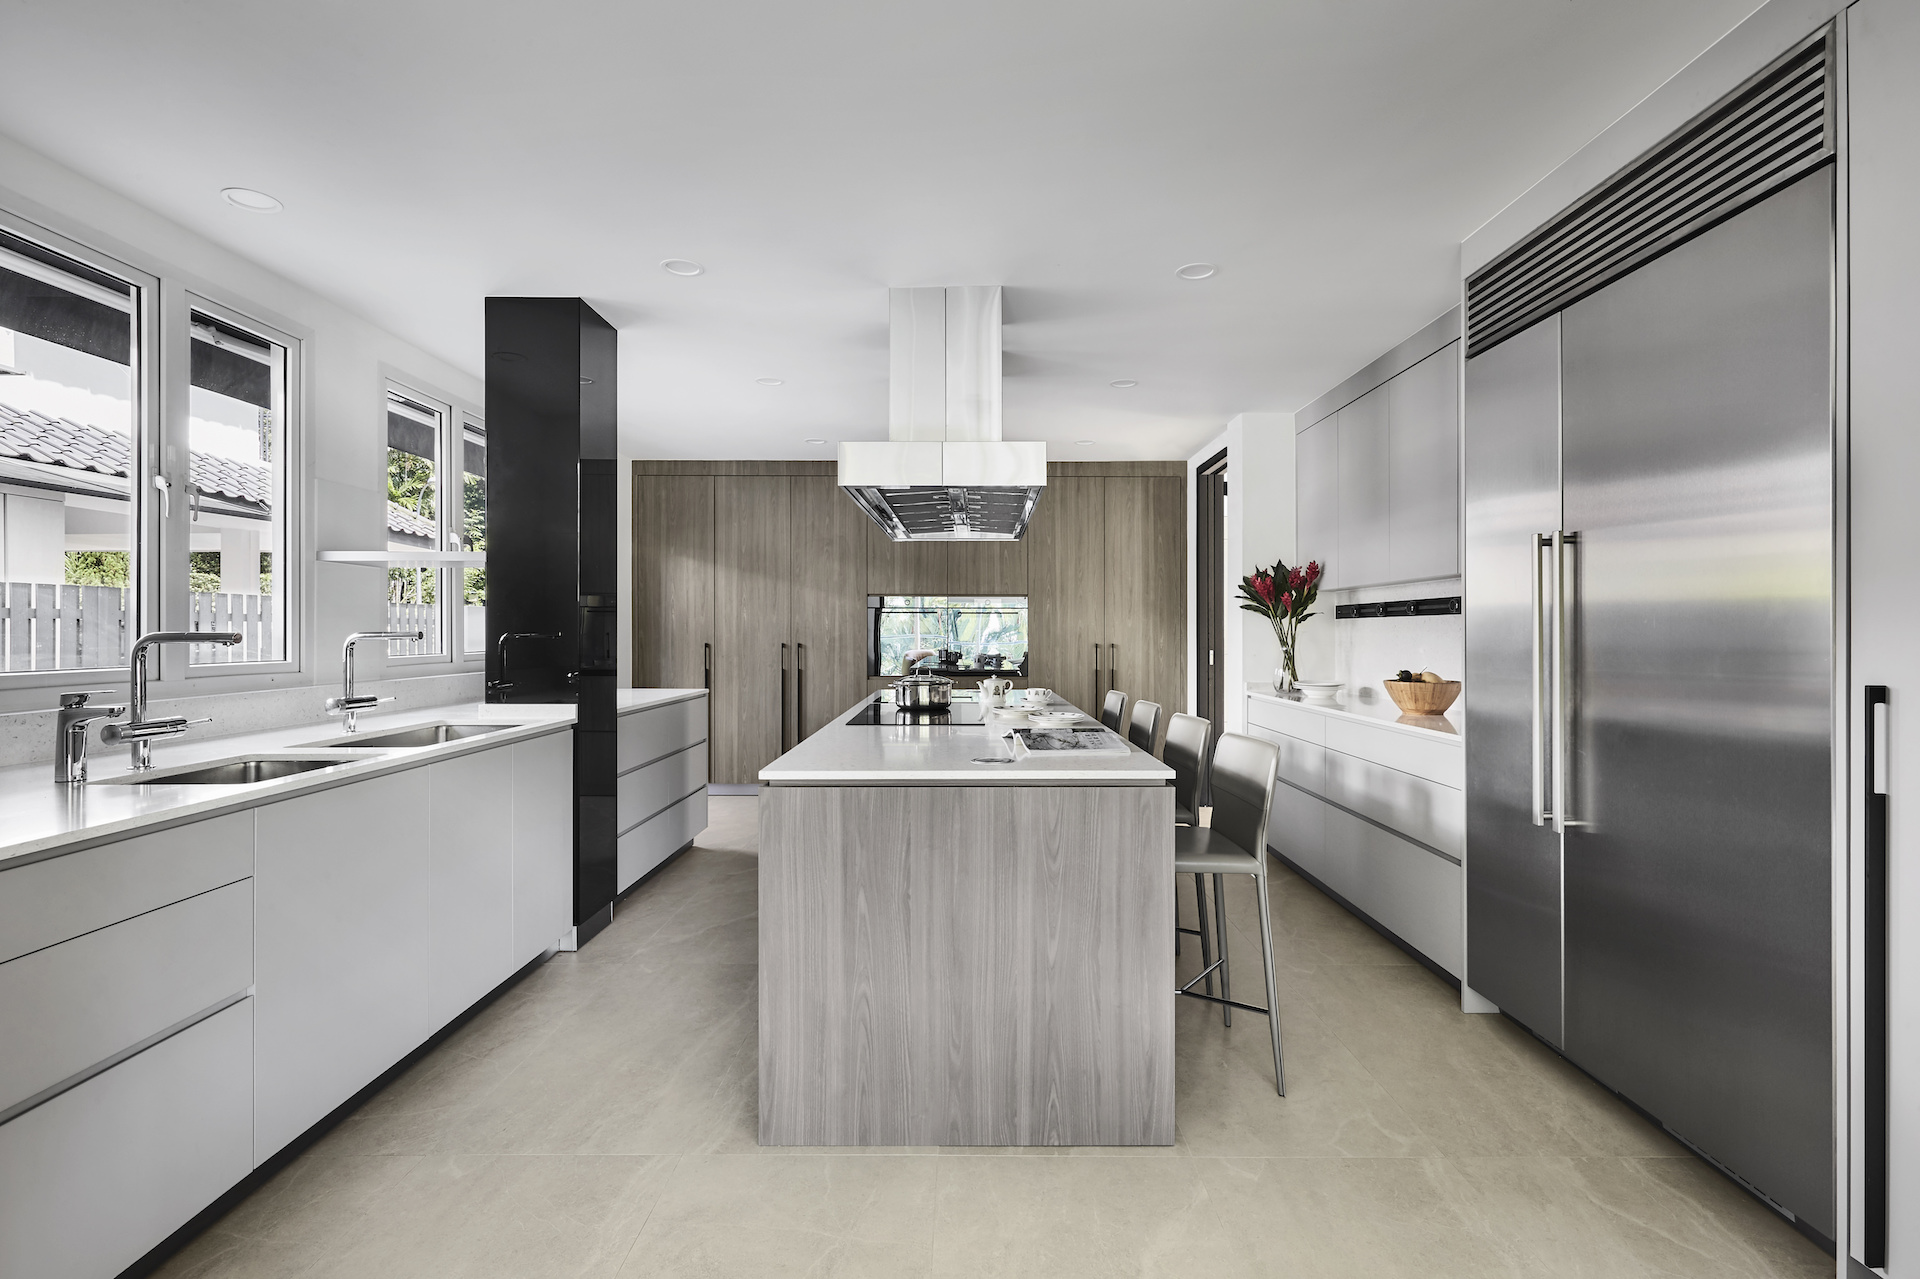 A modern kitchen with white cabinets and stainless steel appliances.